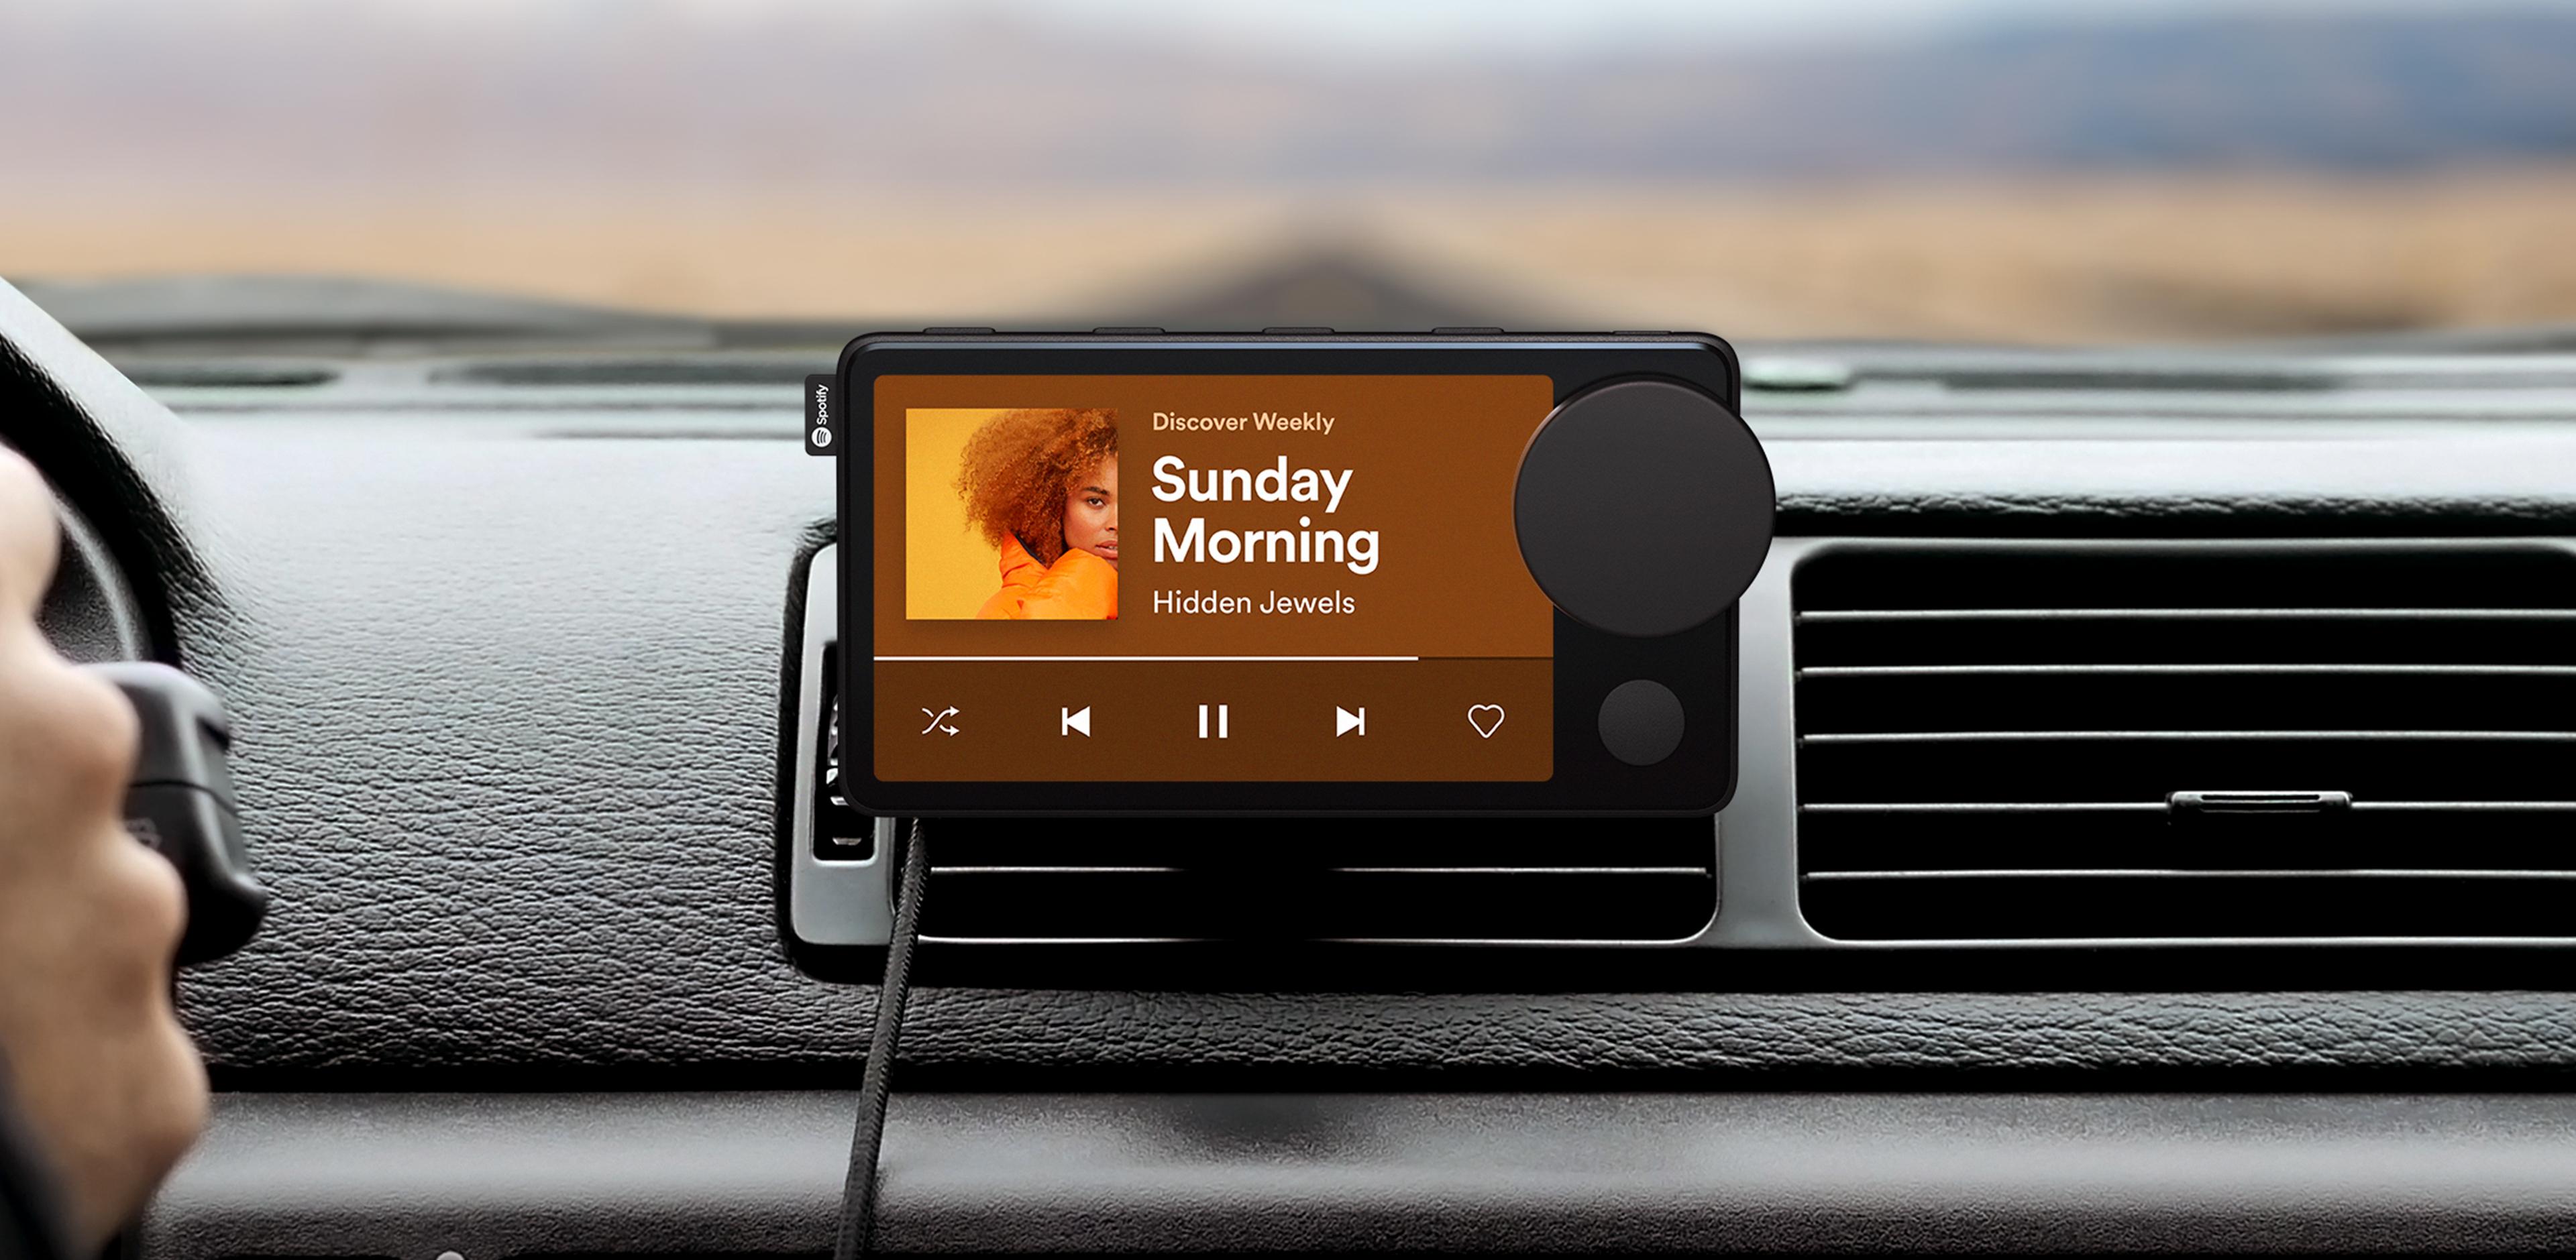 Spotify Stops Making Dash-Mounted 'Car Thing' Just Five Months After Launch